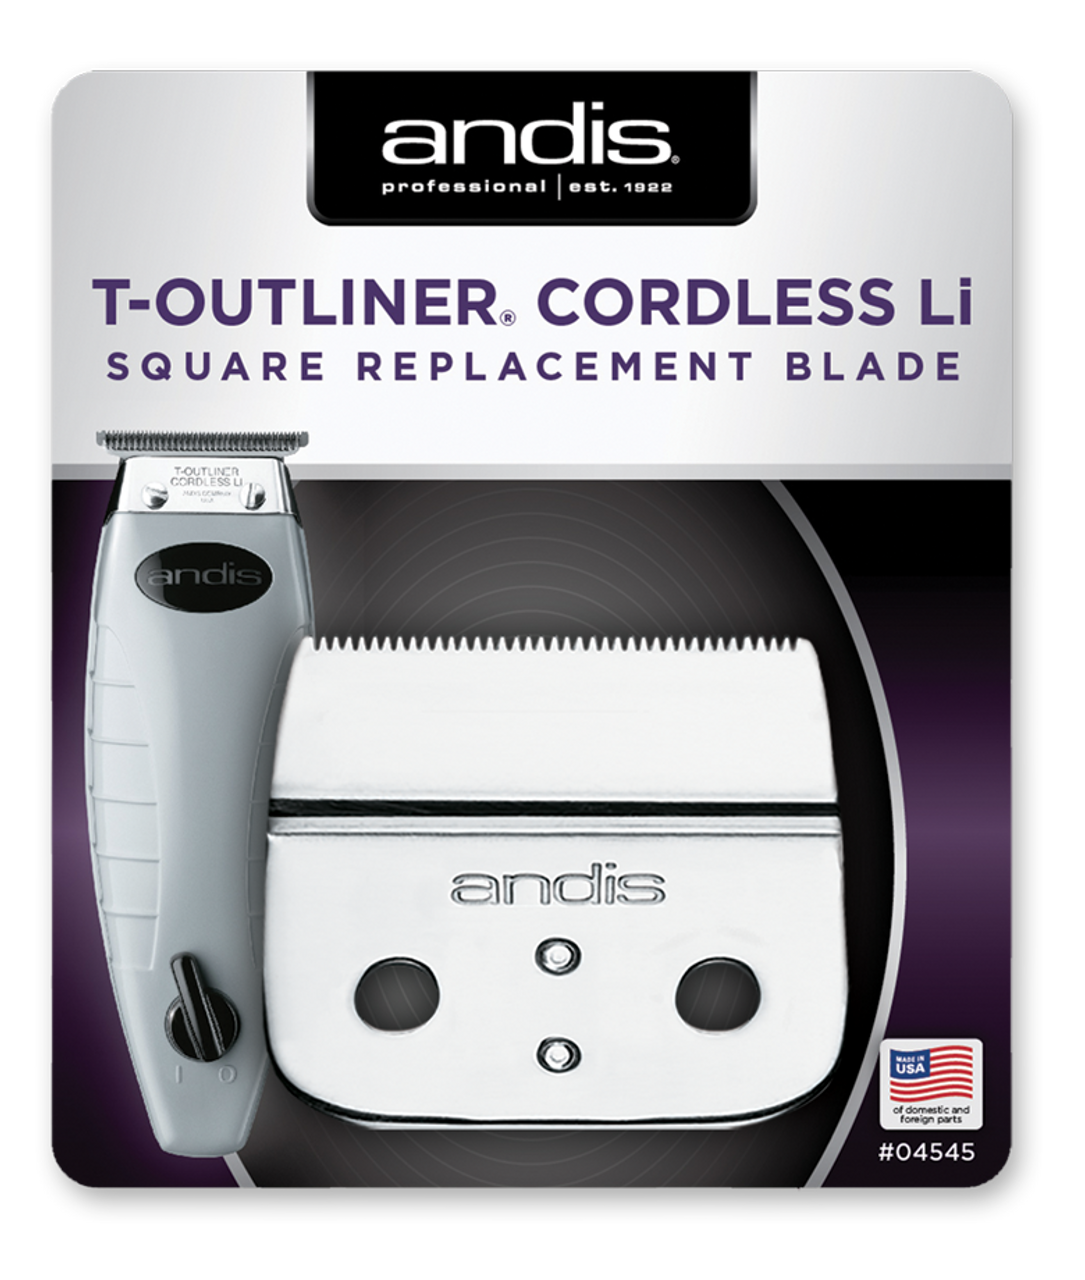 Andis Professional Cordless T-Outliner Li Square Replacement Blade - Model #04545